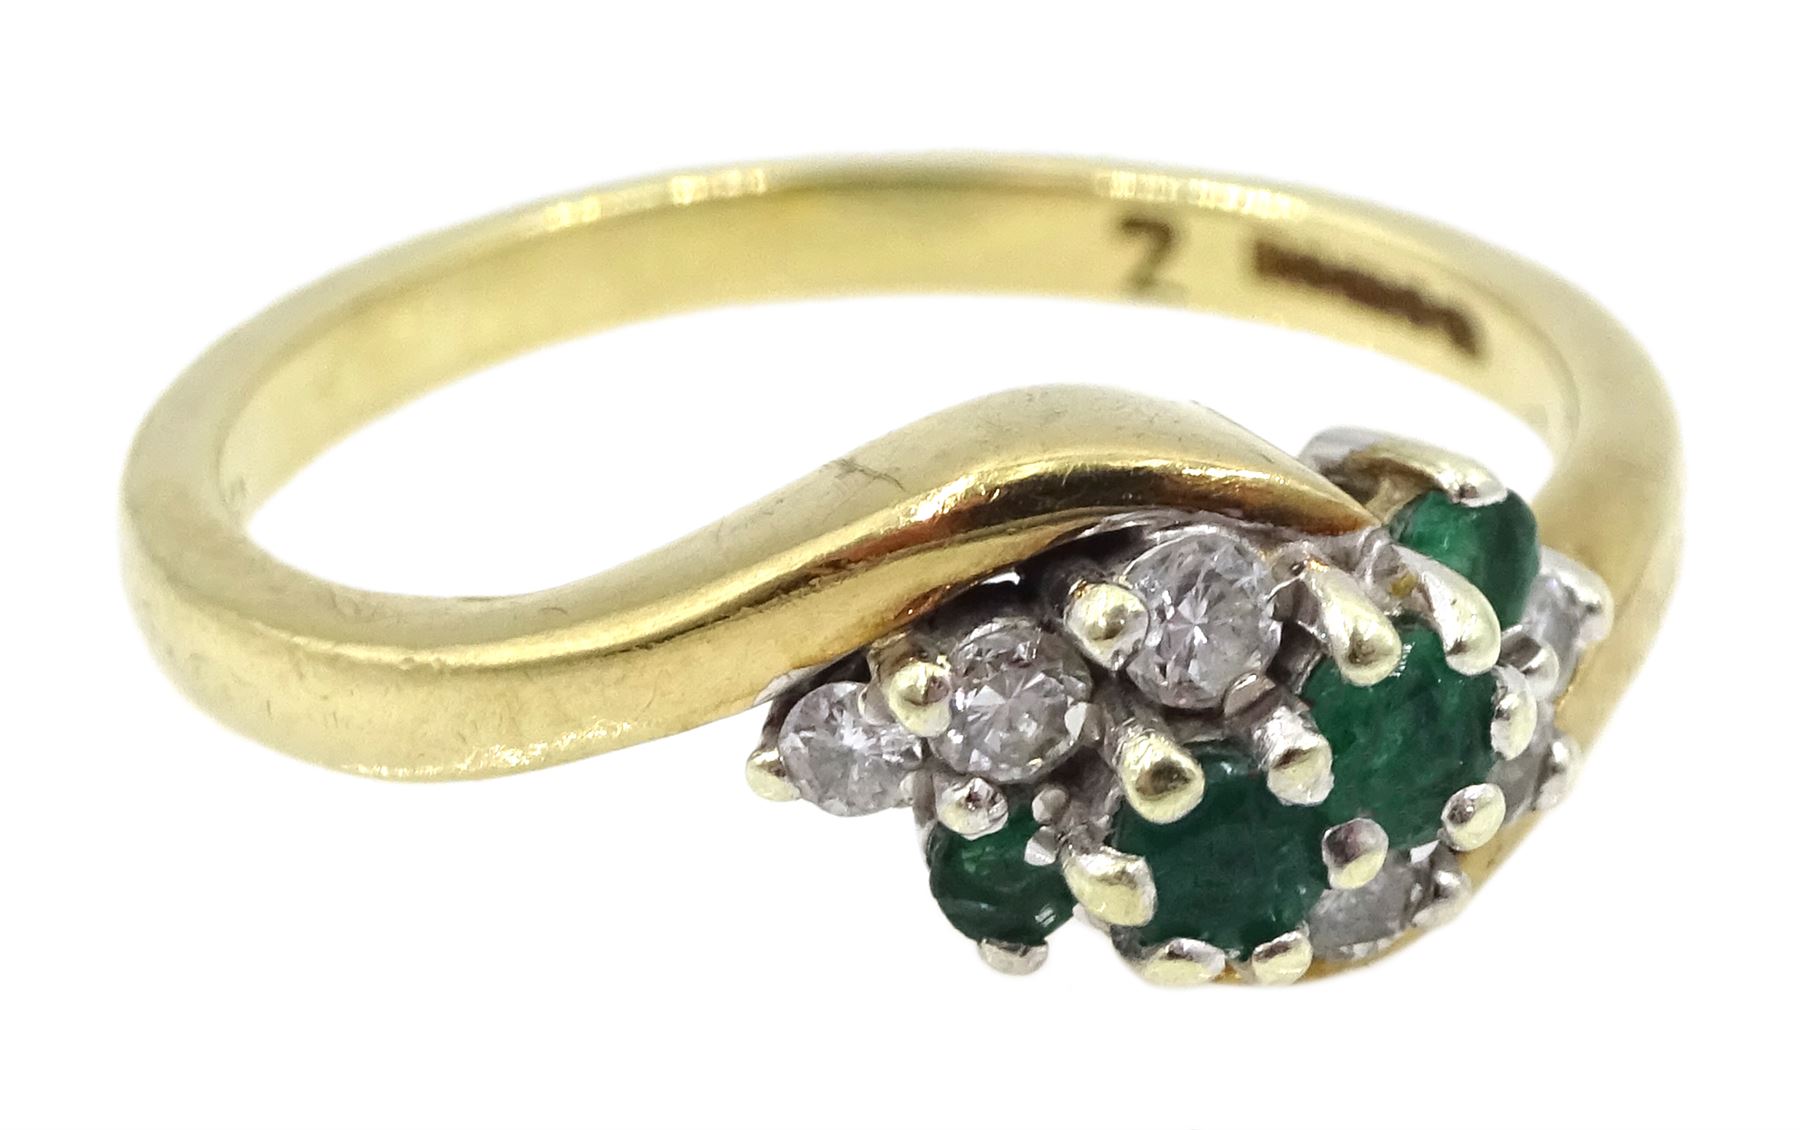 Gold emerald and diamond ring - Image 2 of 2